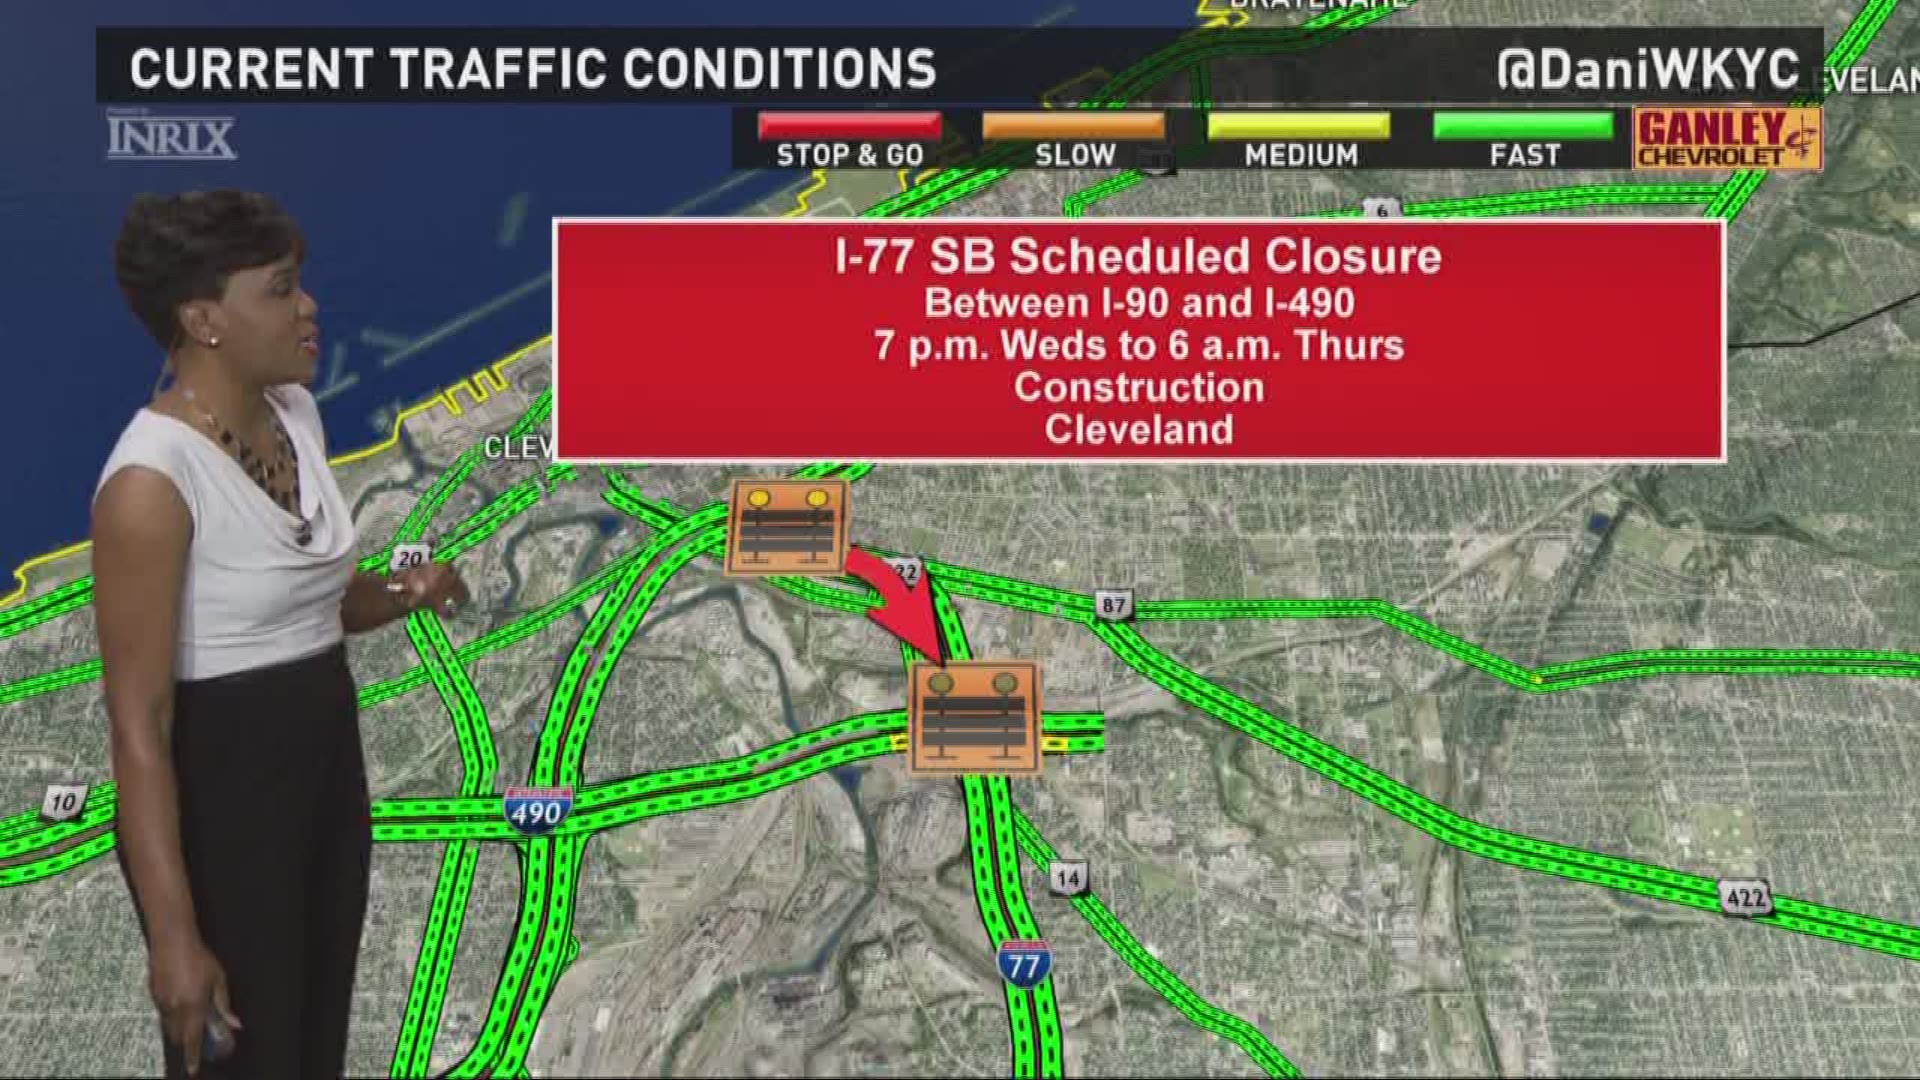 I-77 South between I-90 and I-490 is scheduled to close overnight Wednesday, May 31.